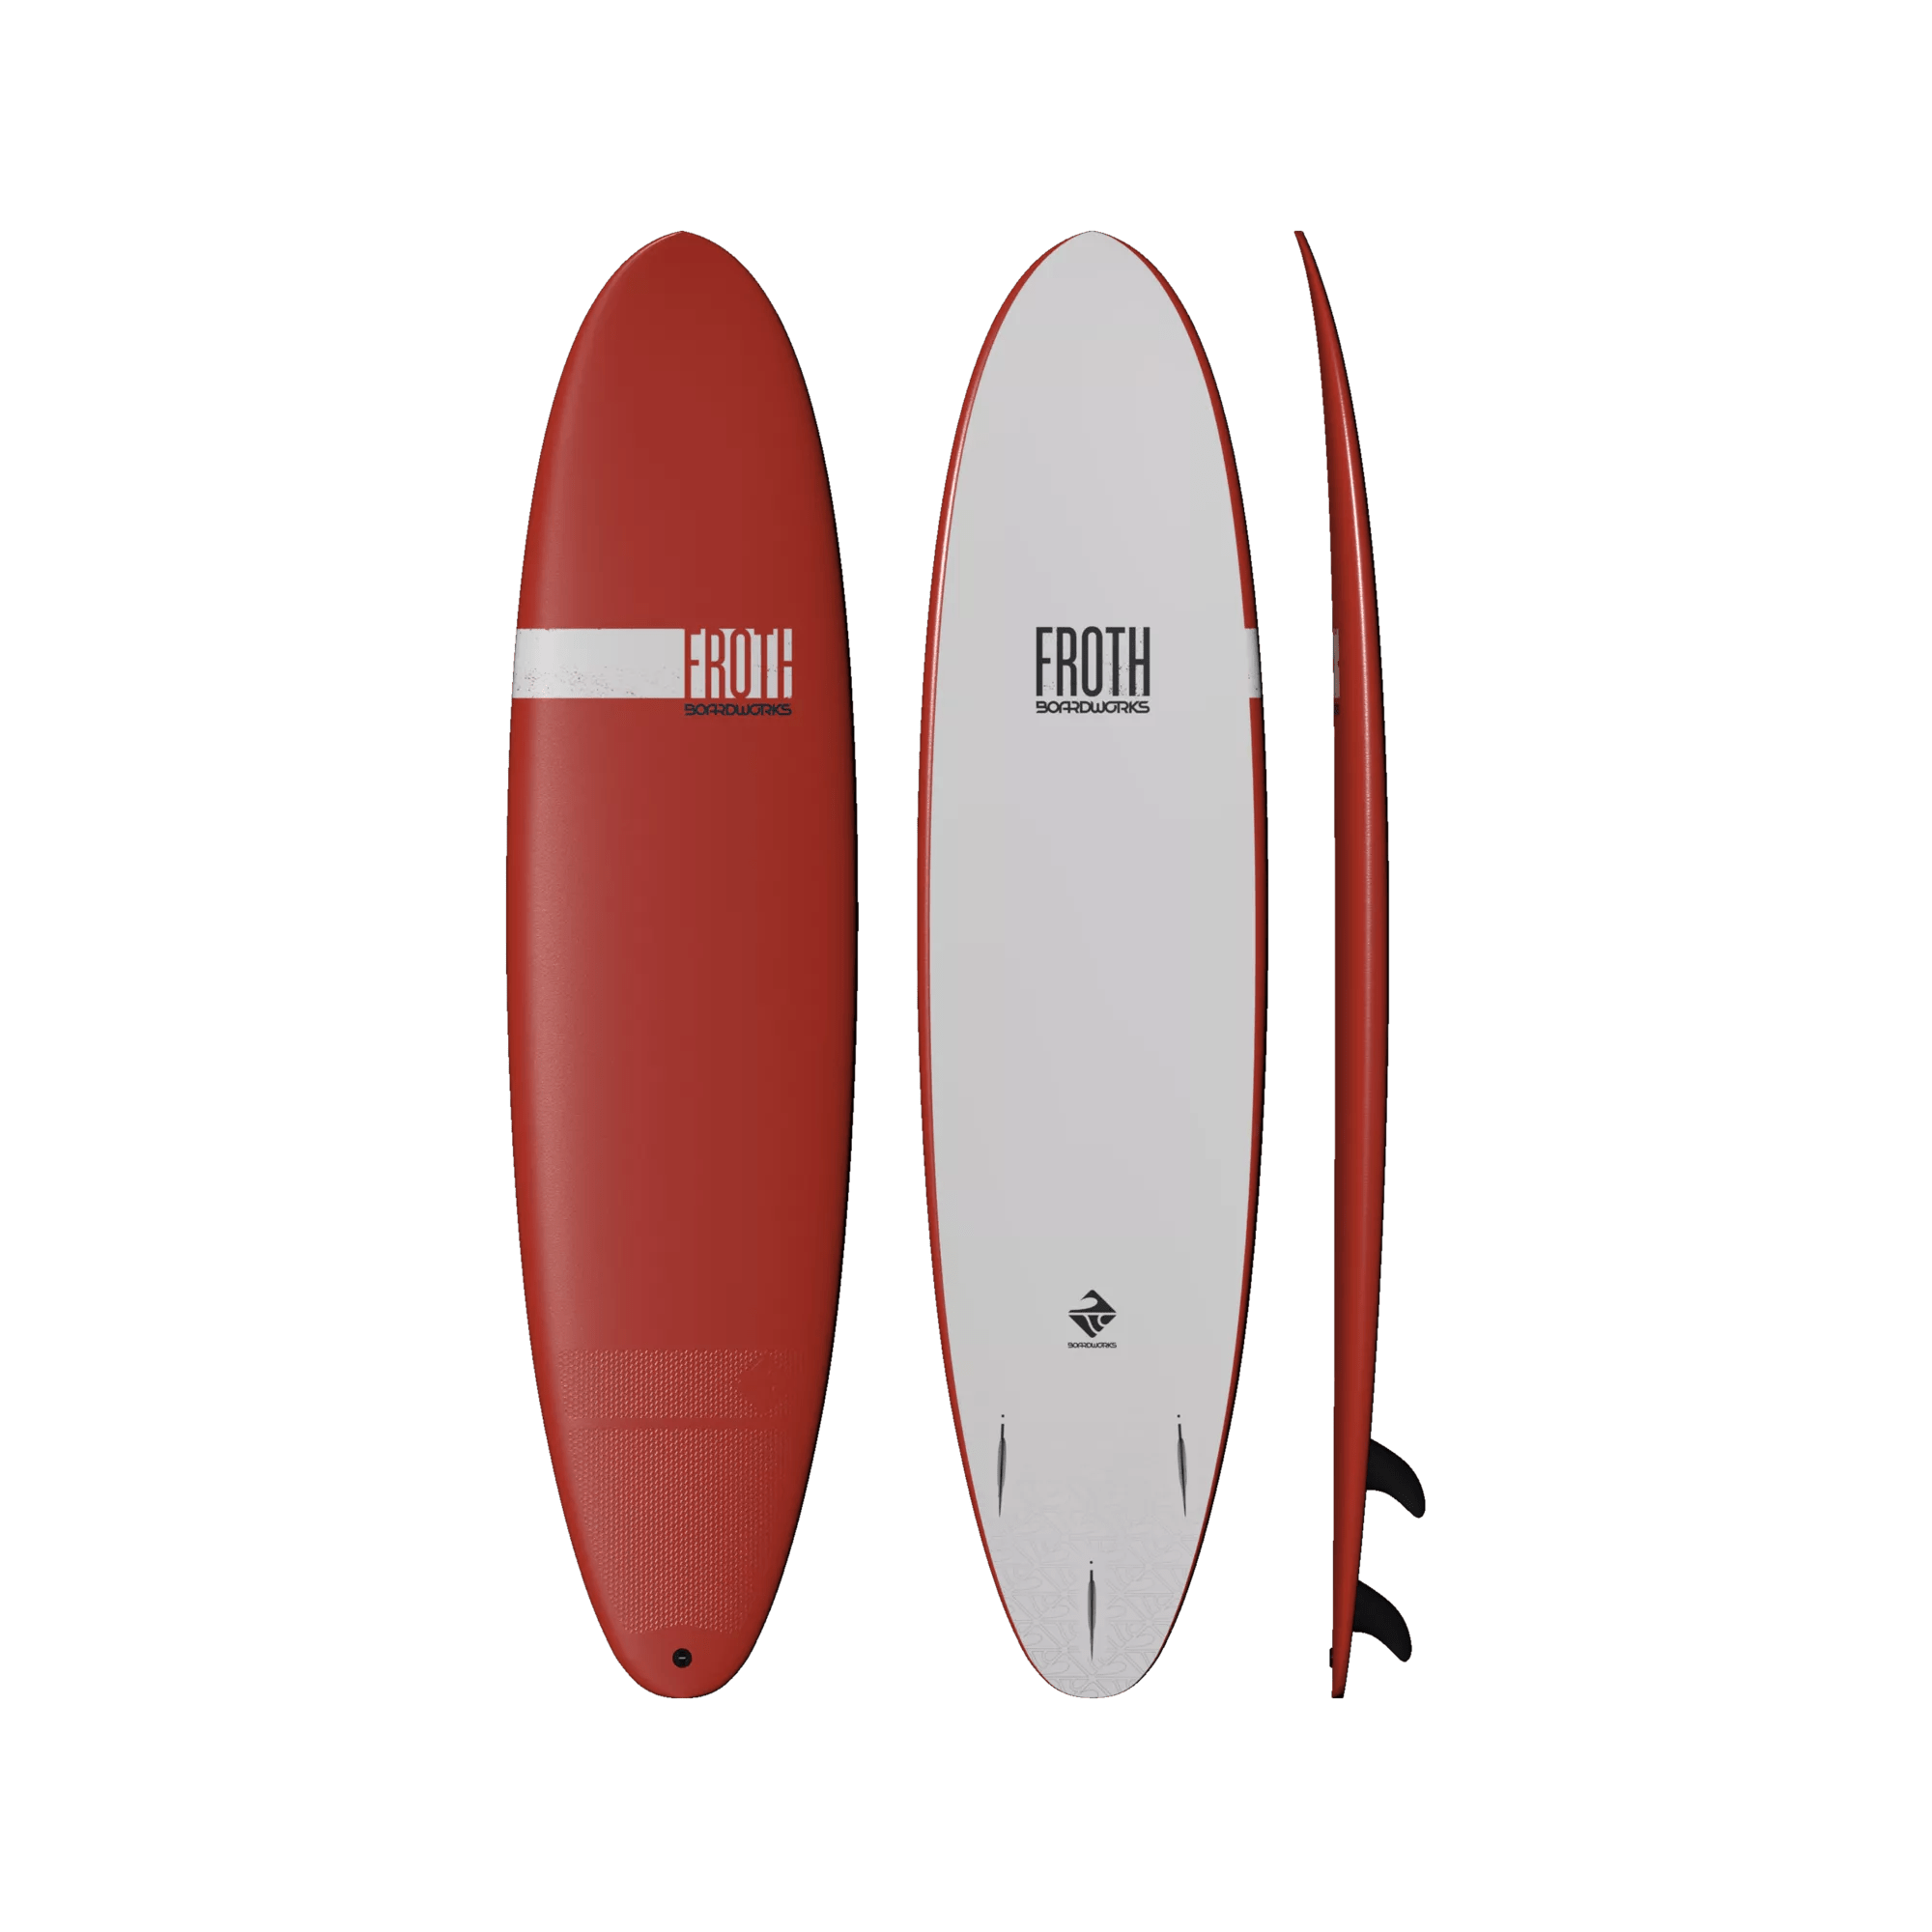 BOARDWORKS - Froth 8' Longboard - Red - 4430319510 - TOP 